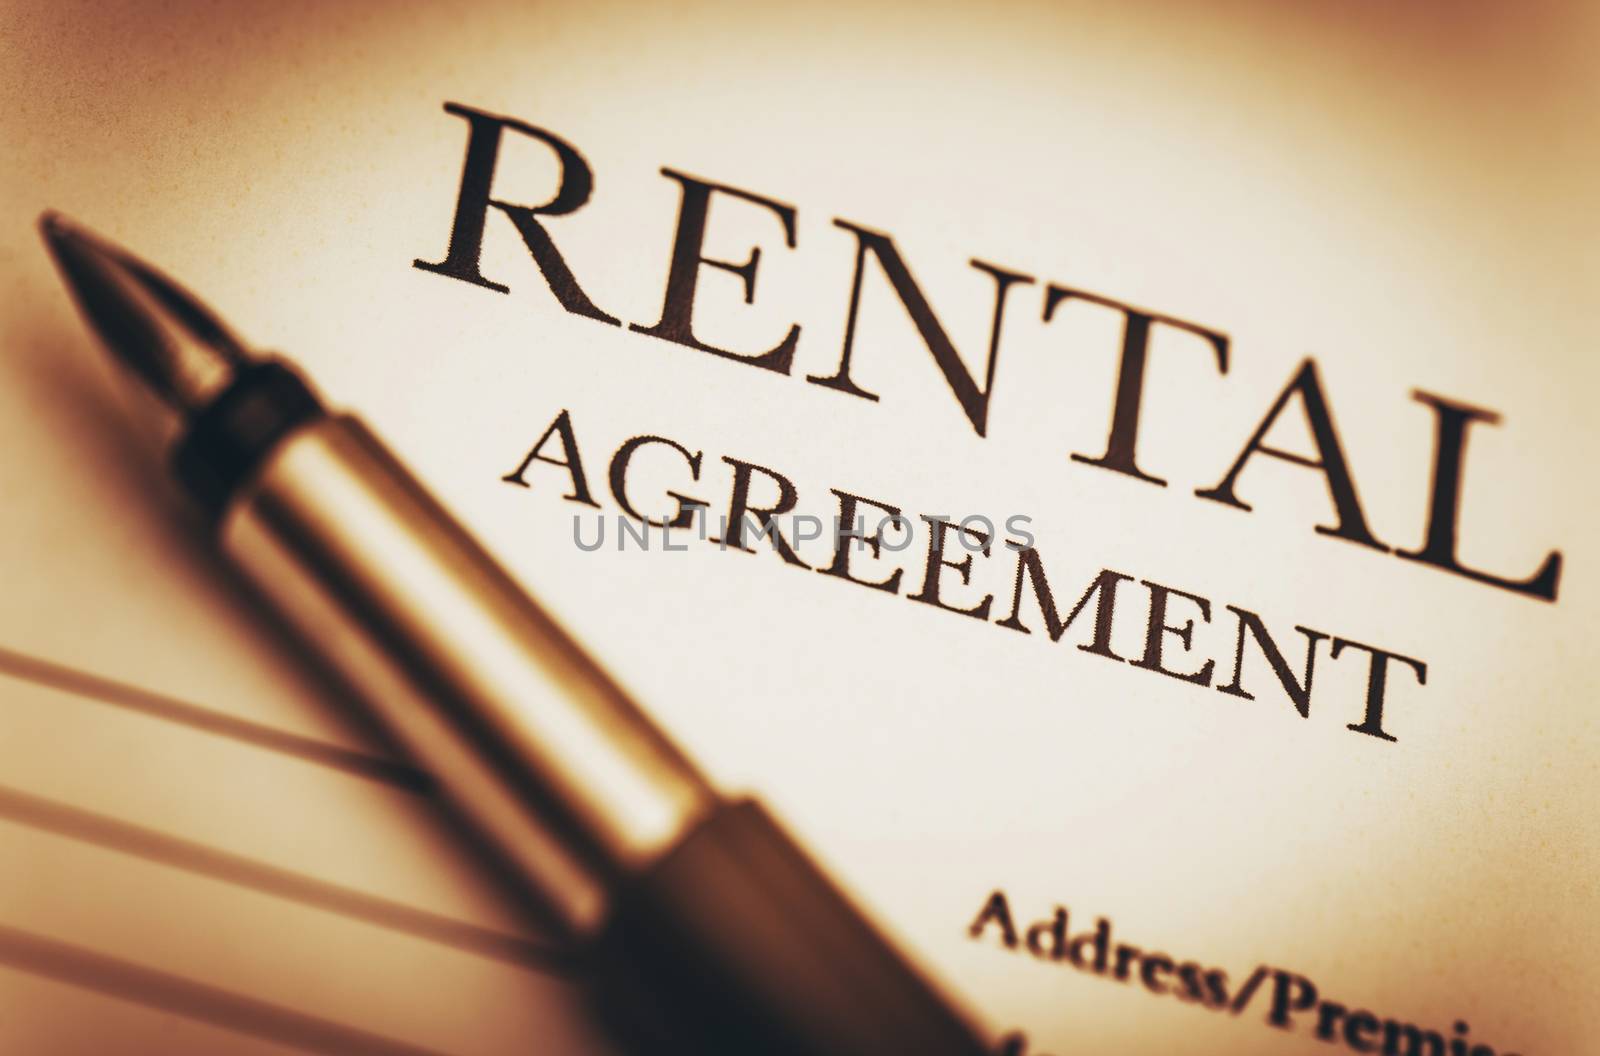 Rental Agreement and Fountain Pen. Ready to Sign Rental Contract. Residential Real Estate Concept Photo.